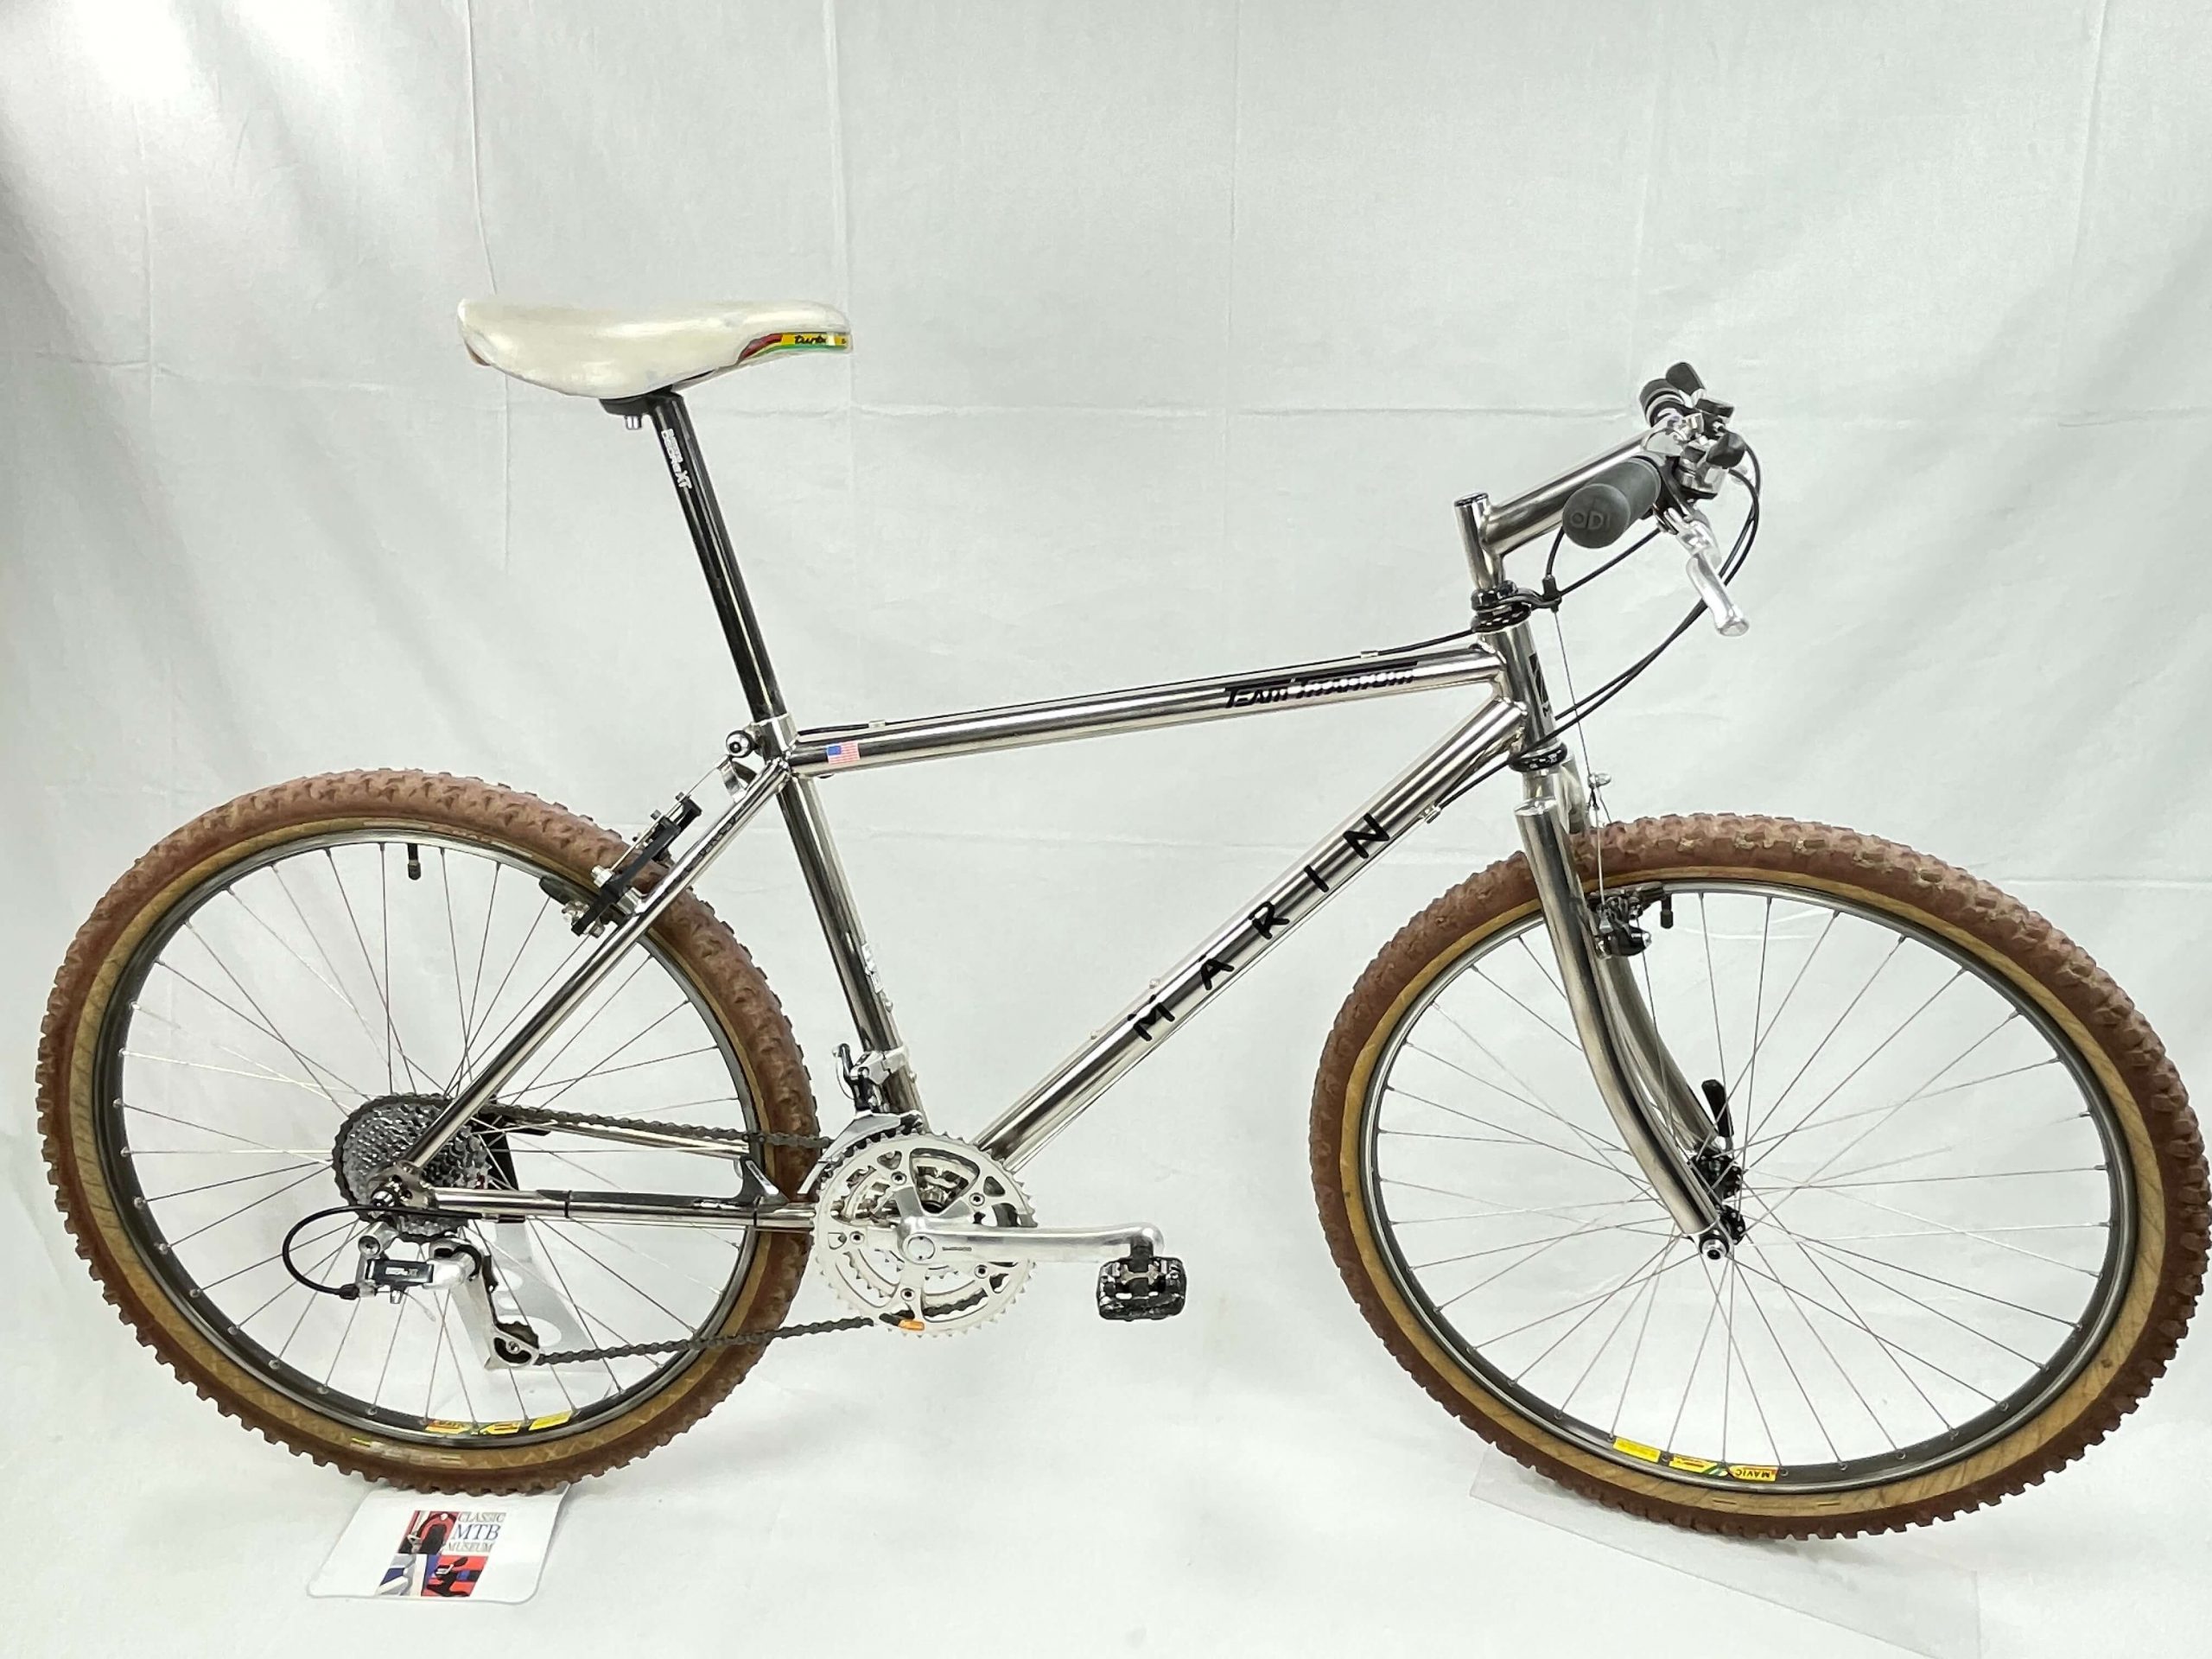 Read More about the Marin 1990 #2921